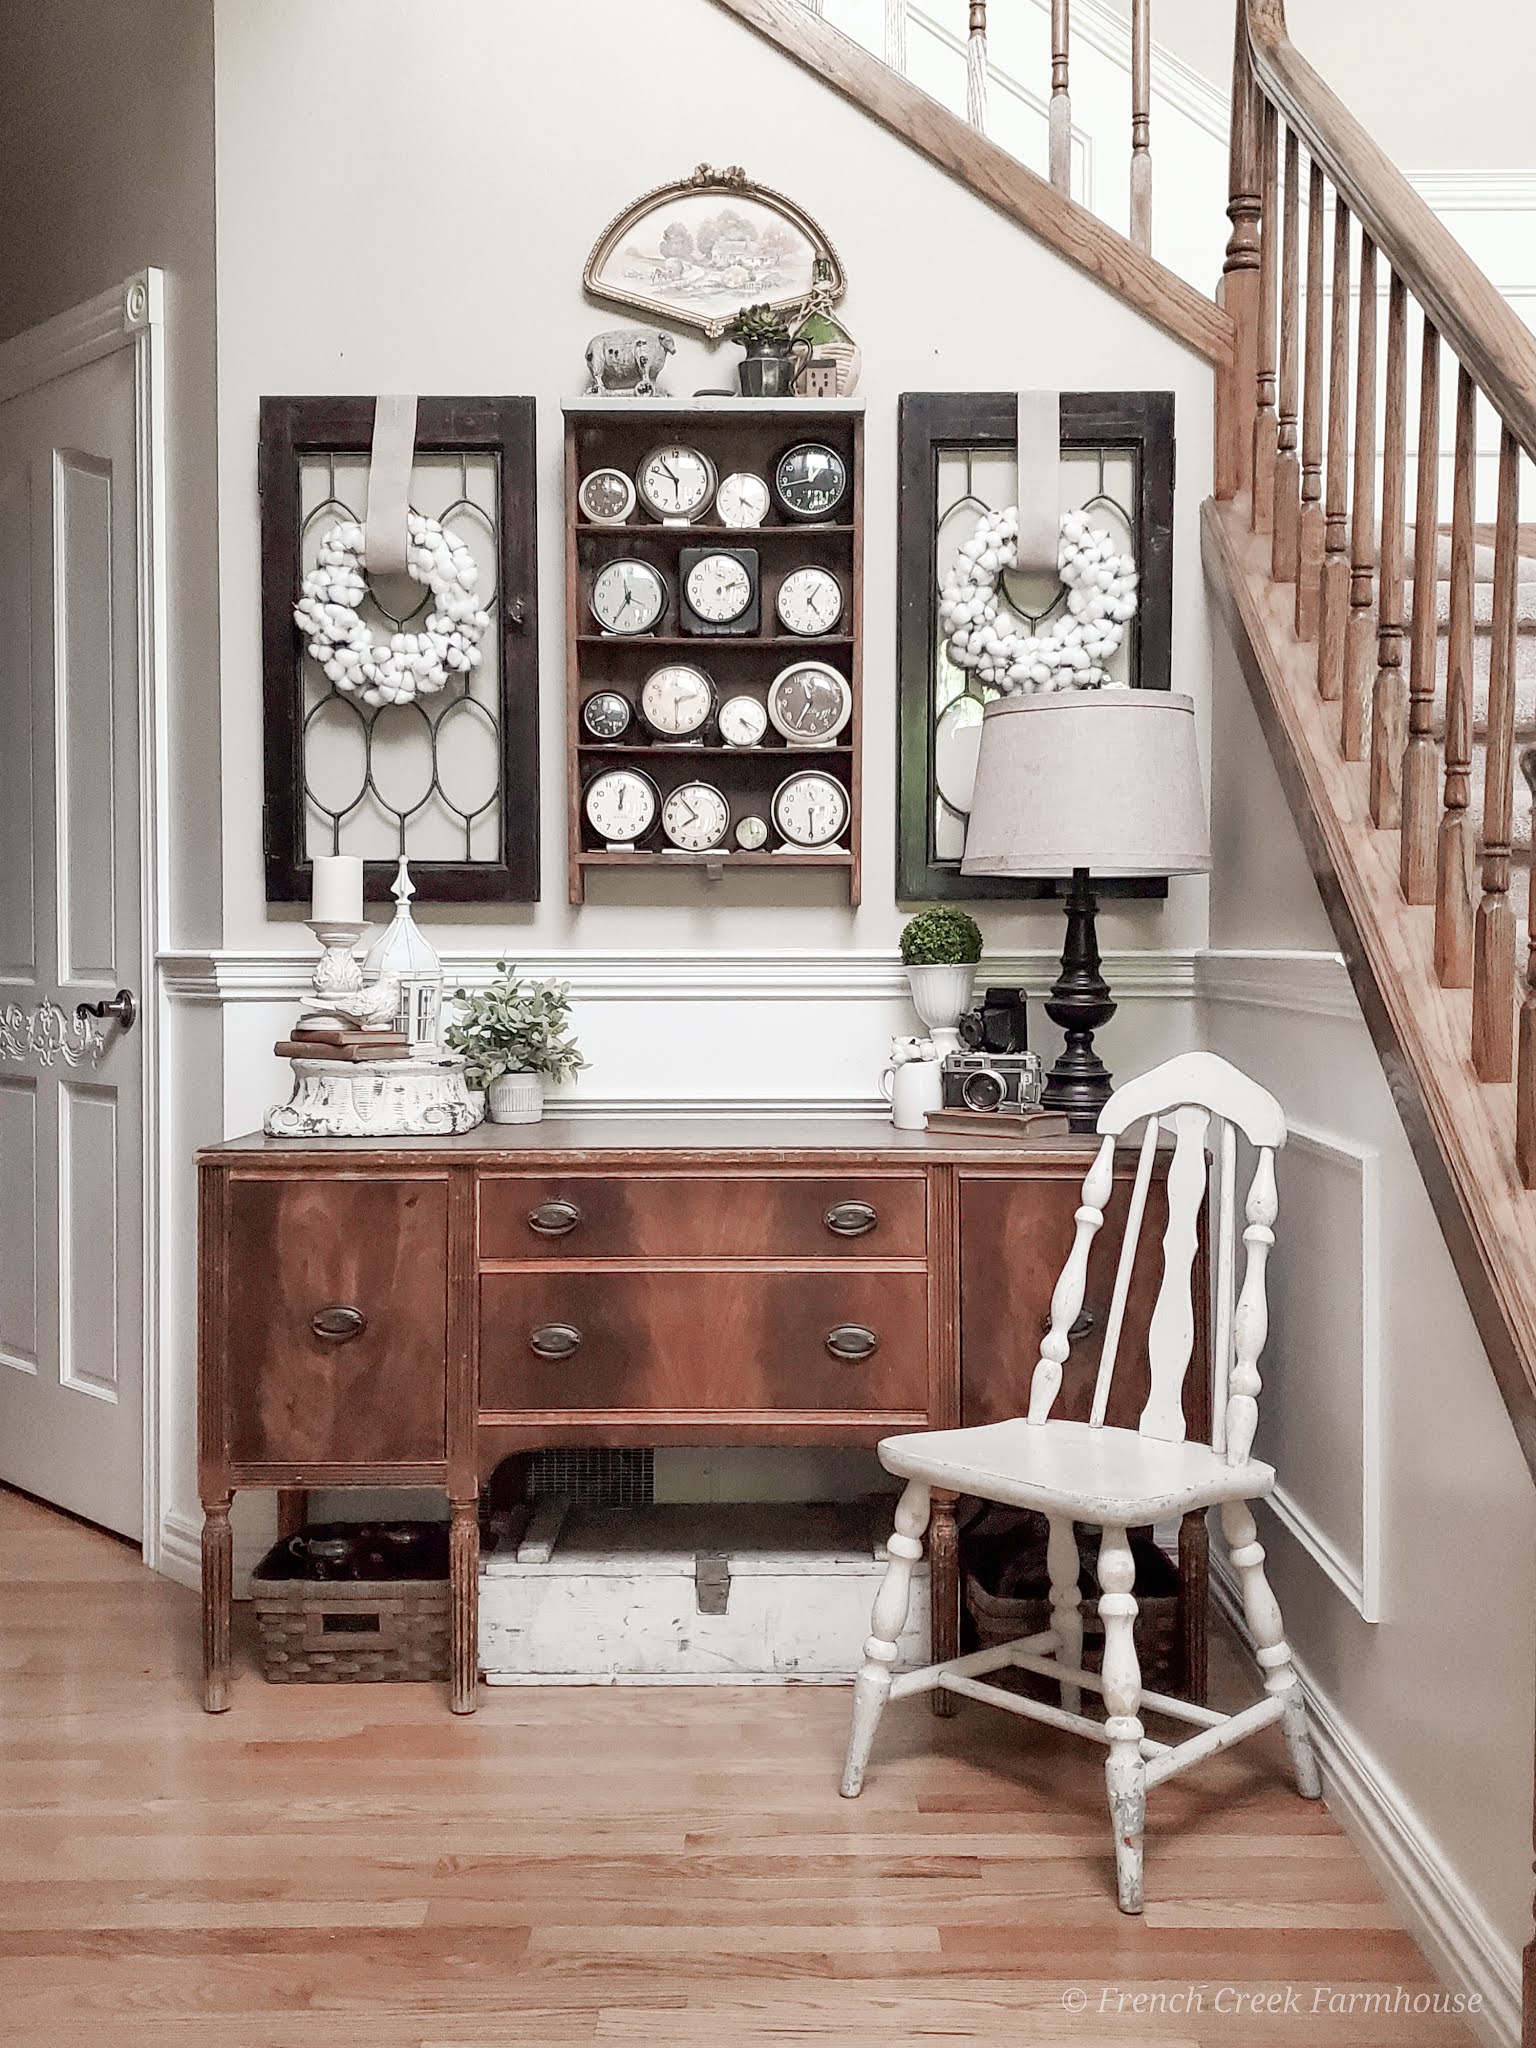 Using key vintage pieces will give your home the aesthetic you want